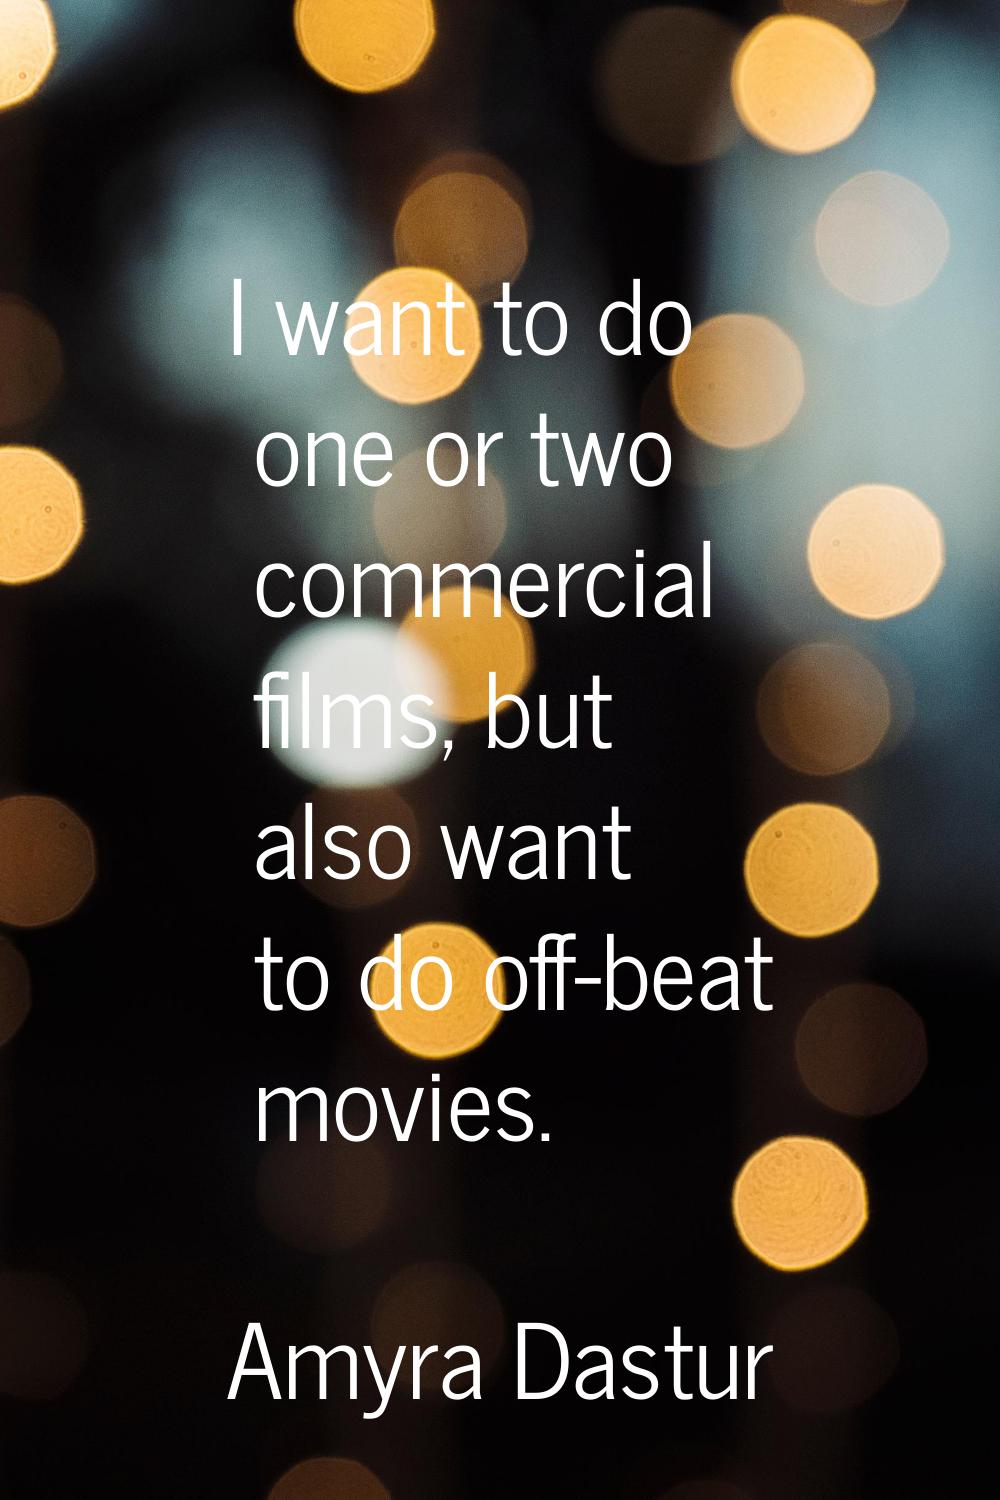 I want to do one or two commercial films, but also want to do off-beat movies.